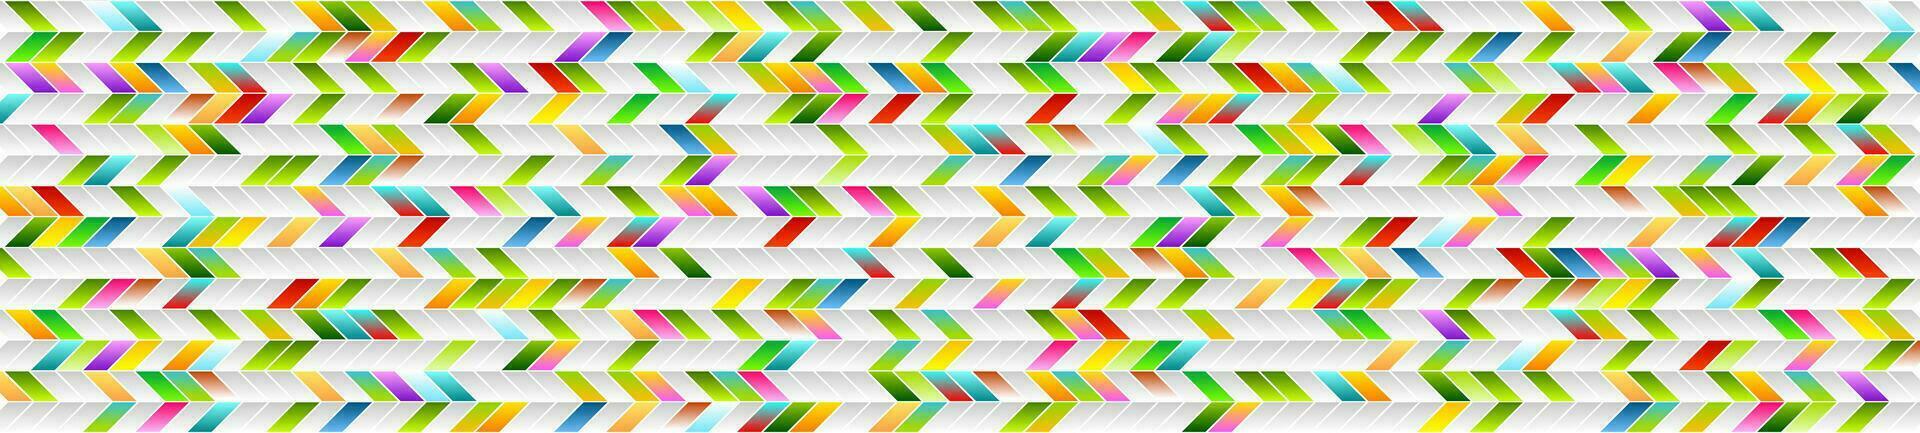 Grey and colorful geometric hi-tech abstract background vector